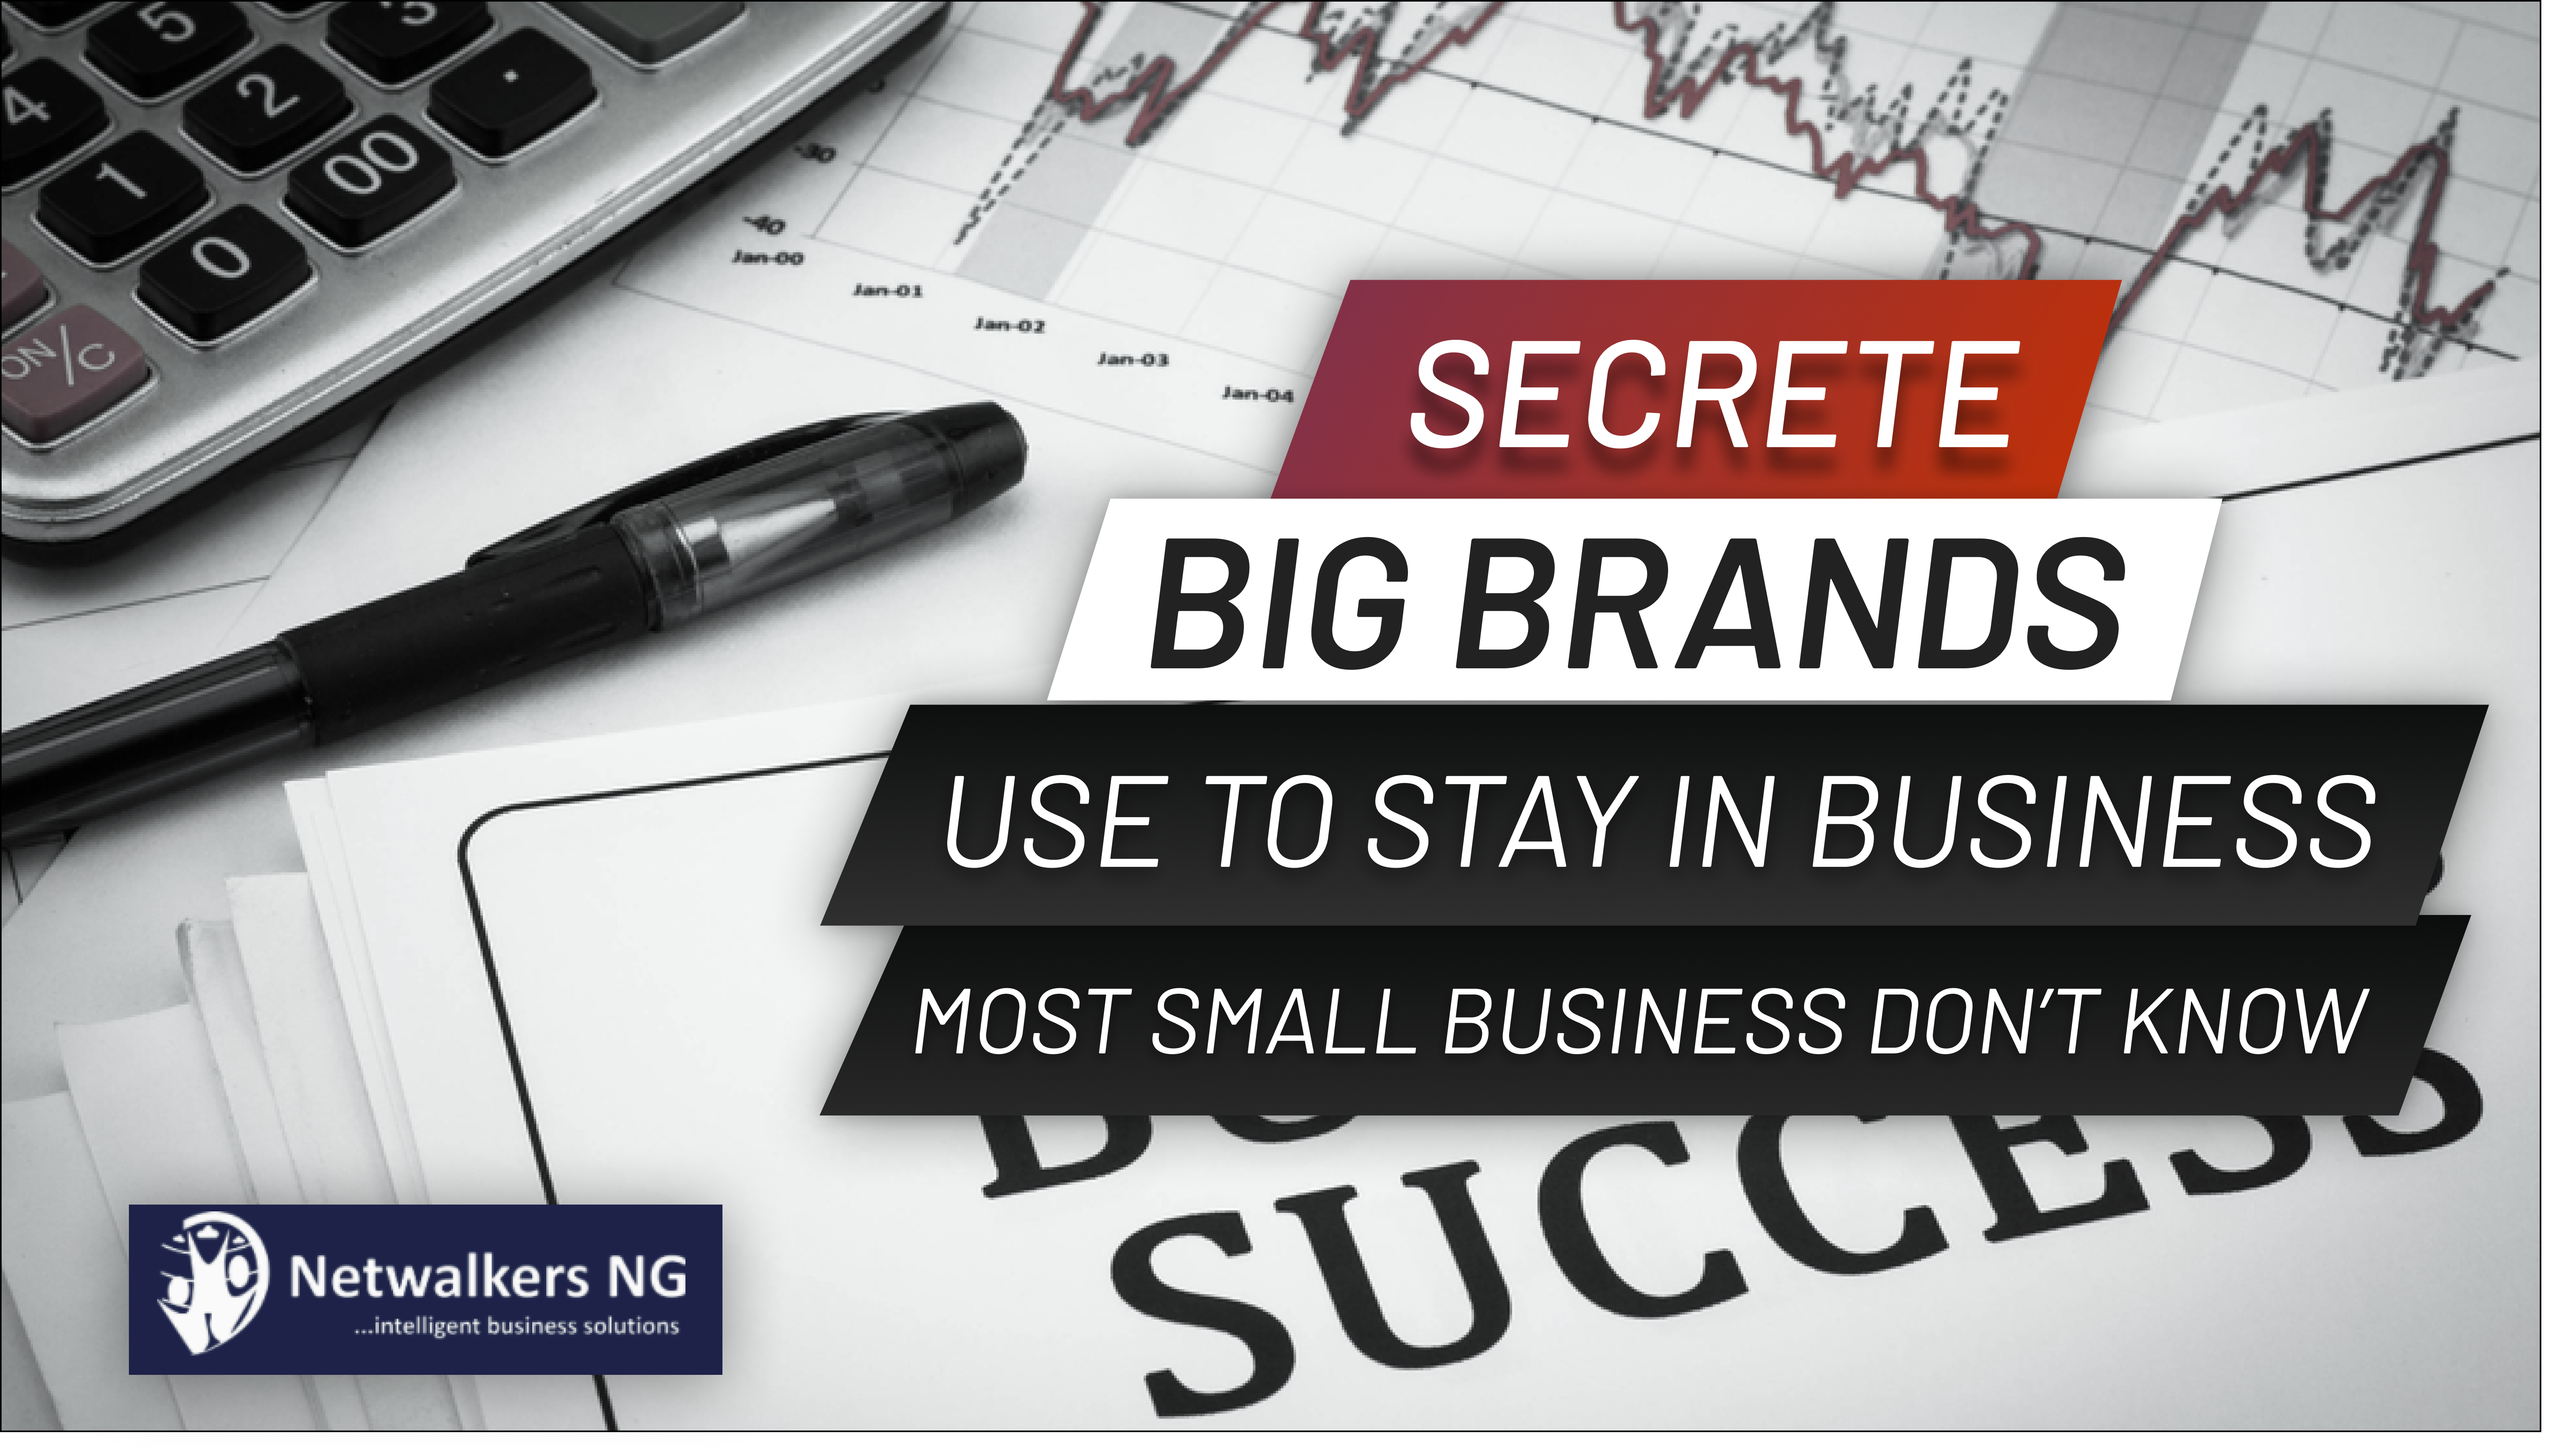 Secrete Big Brands Use To Stay Business Most Small Businesses Don’t Know